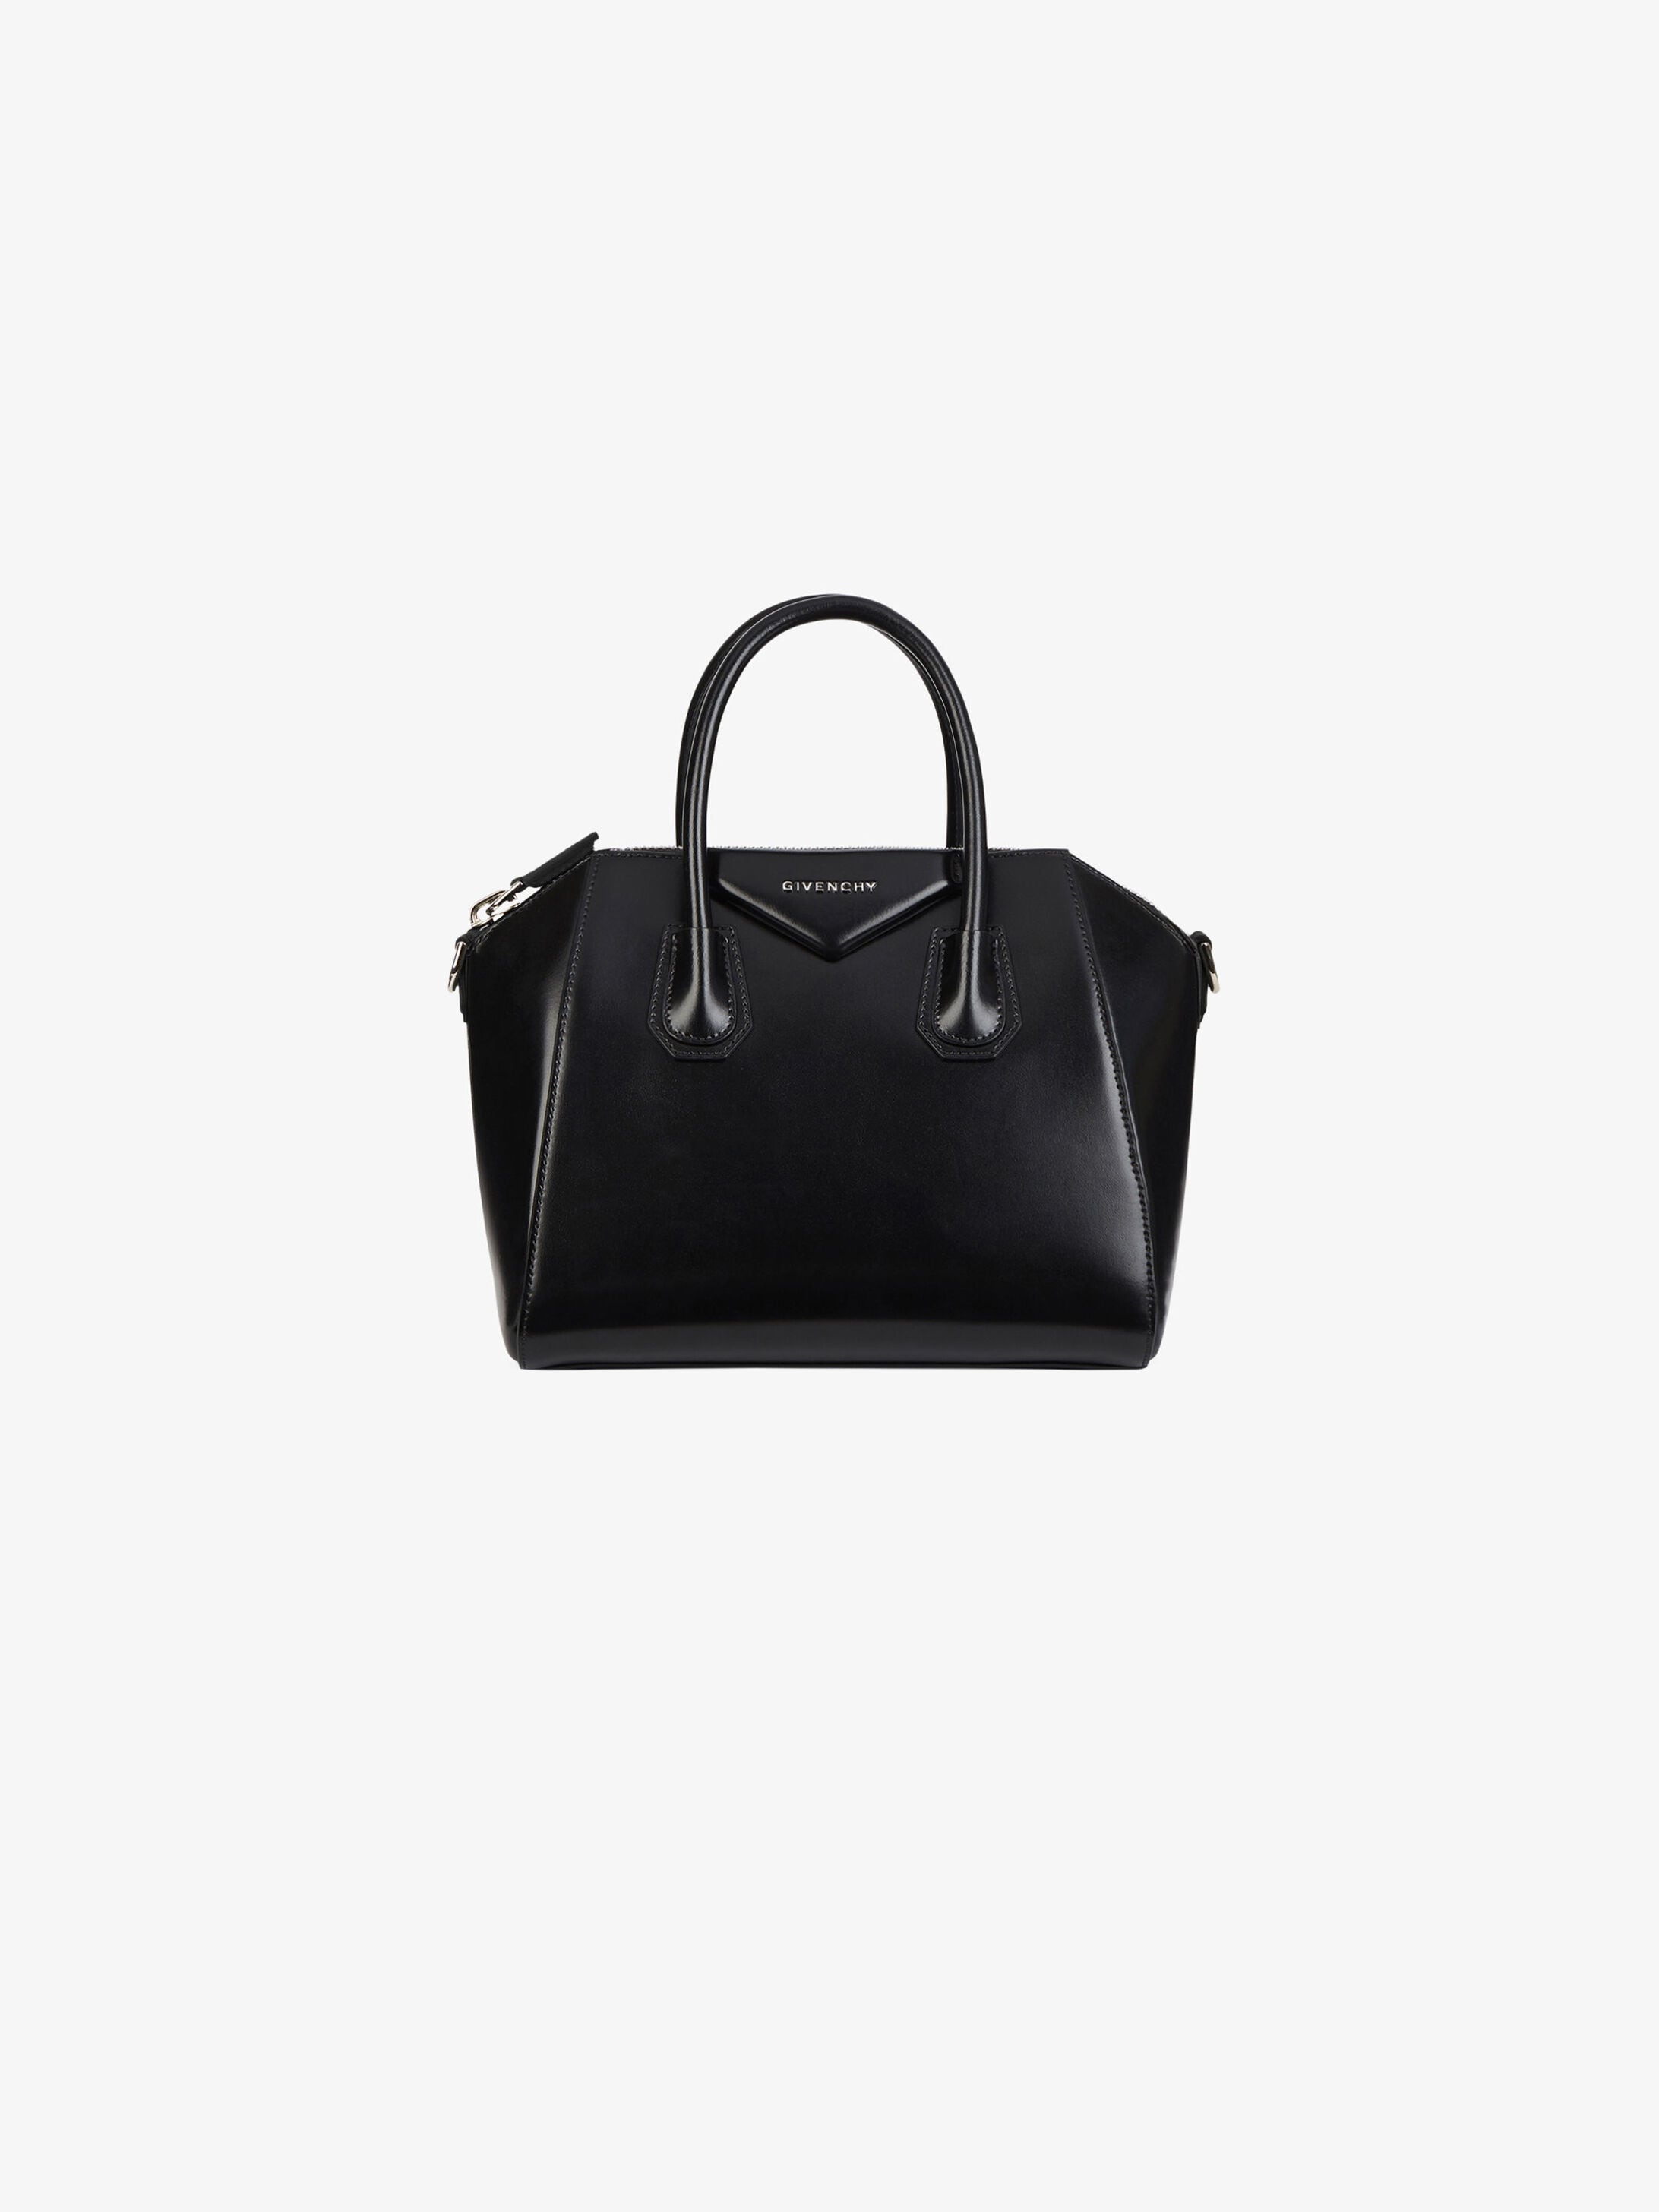 givenchy pouch price